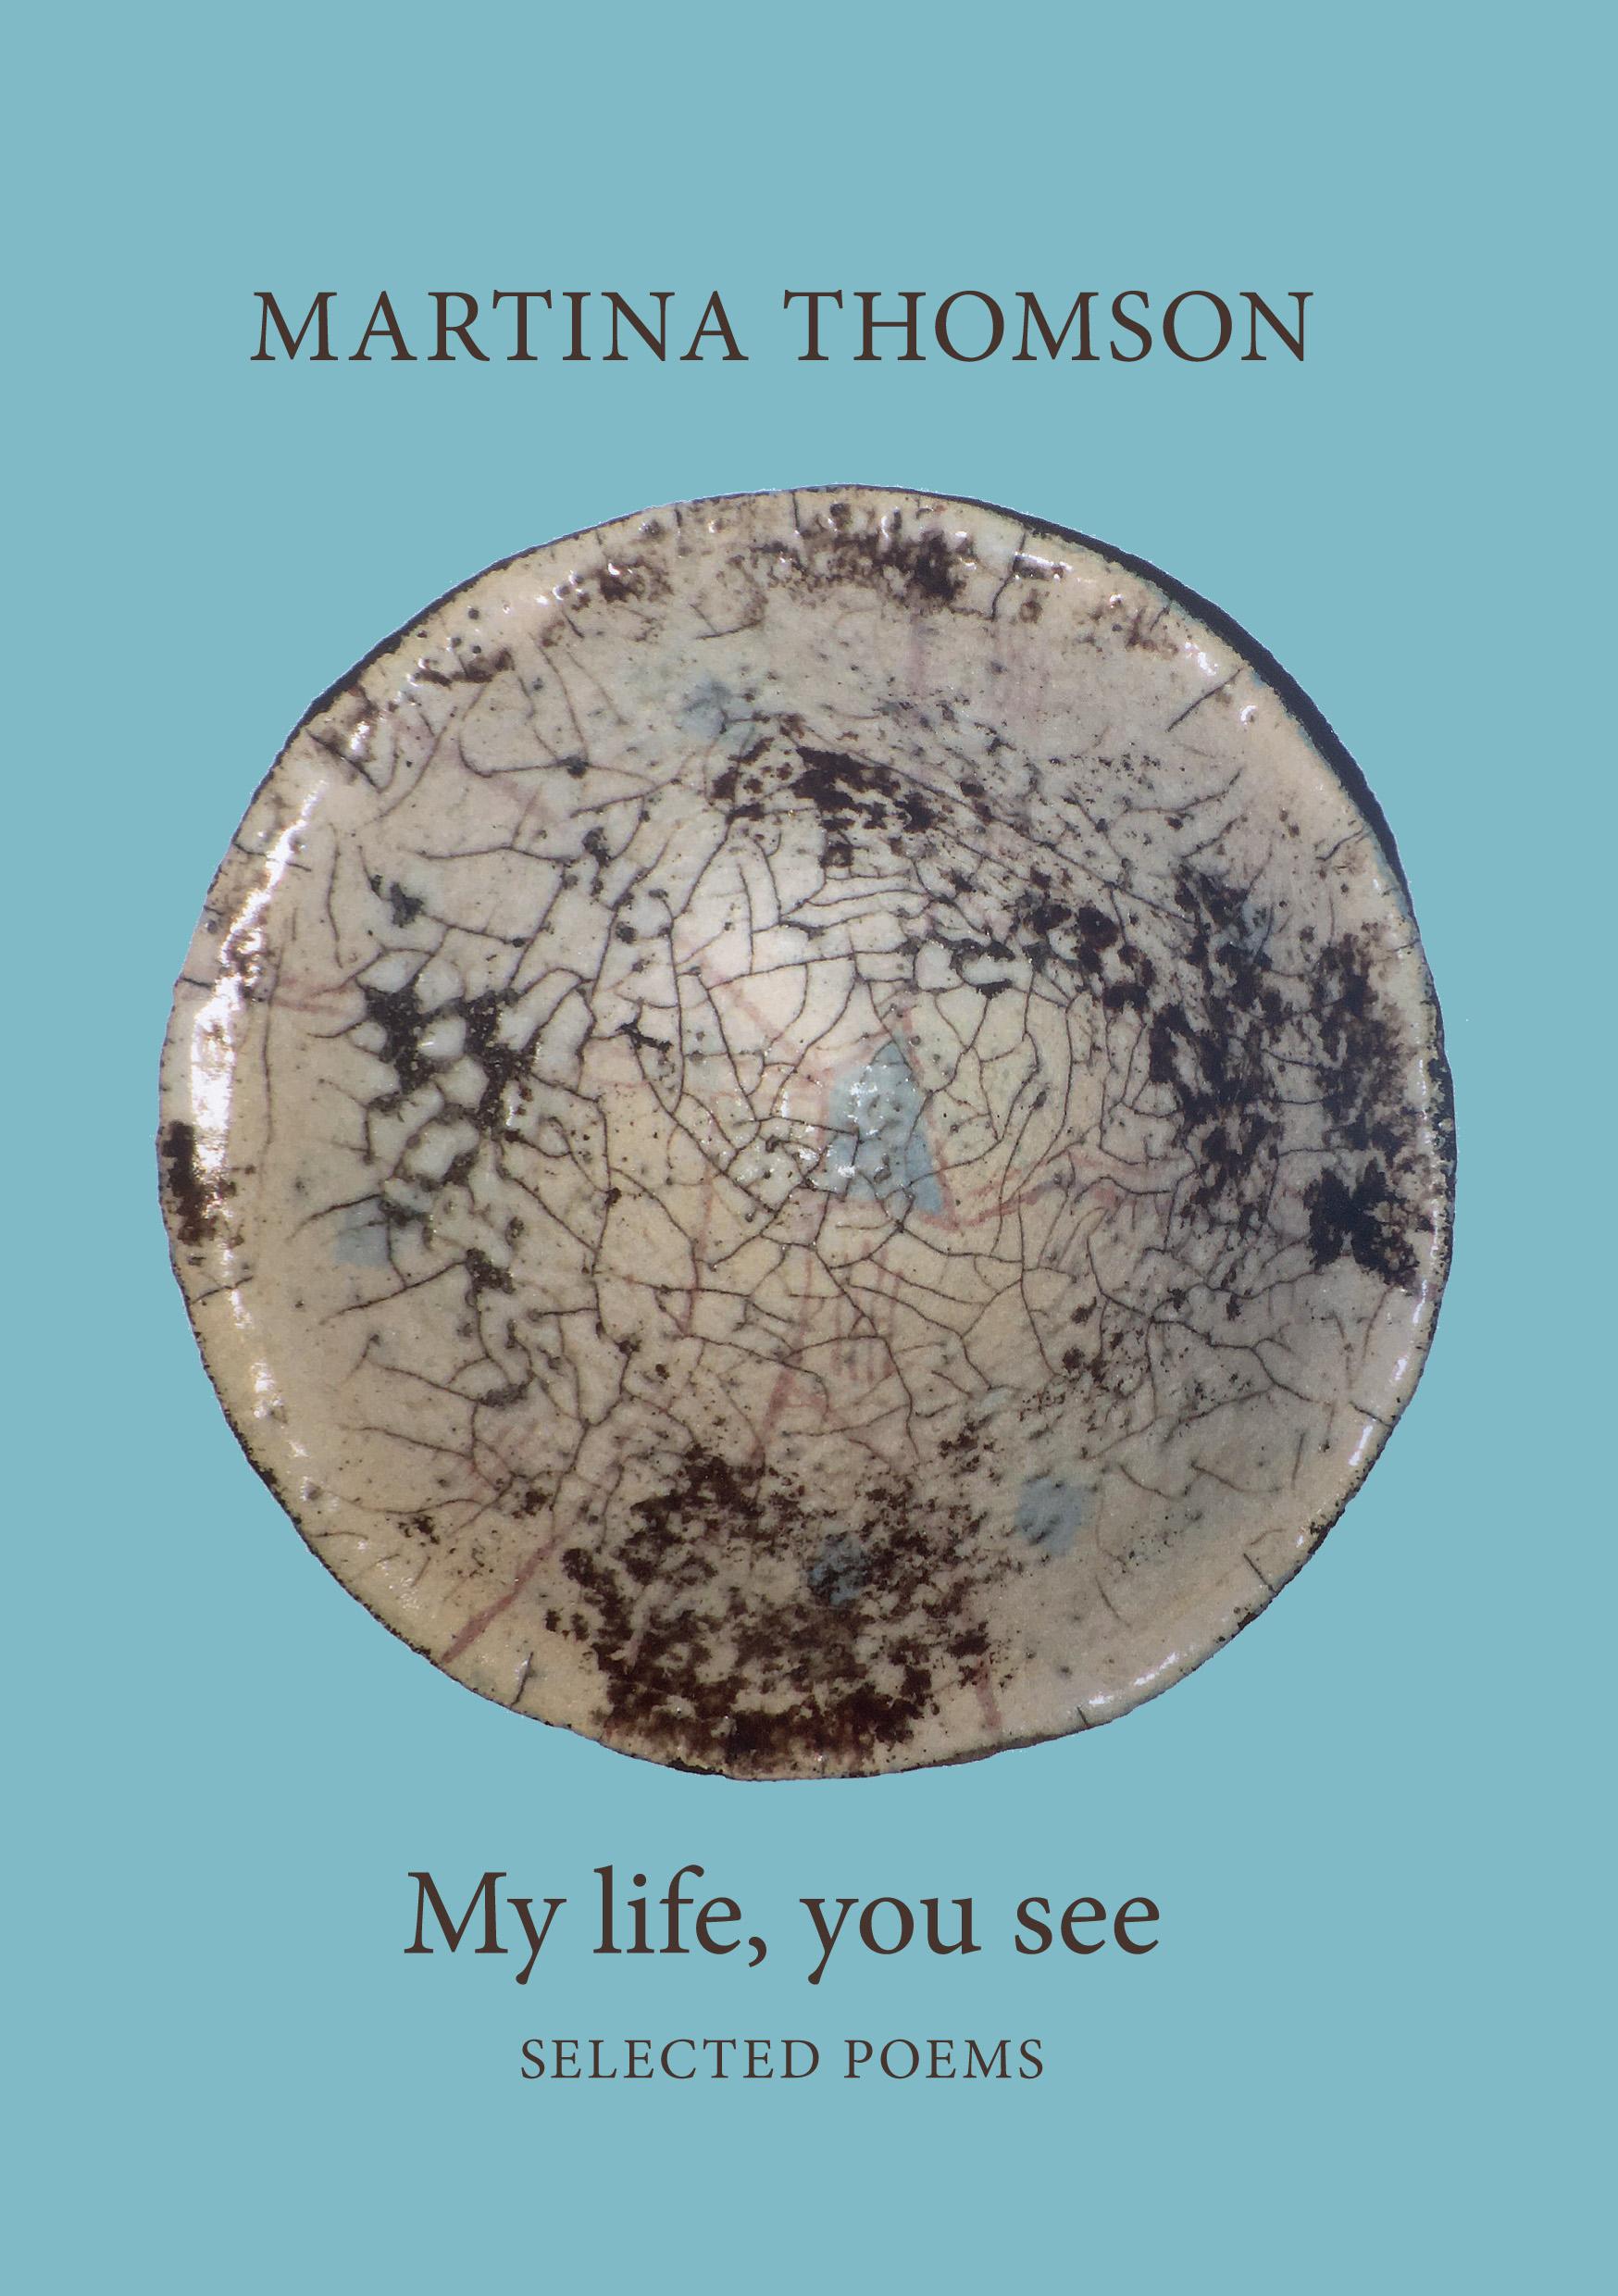 “My Life, you see” a new book of Martina Thomson’s poetry